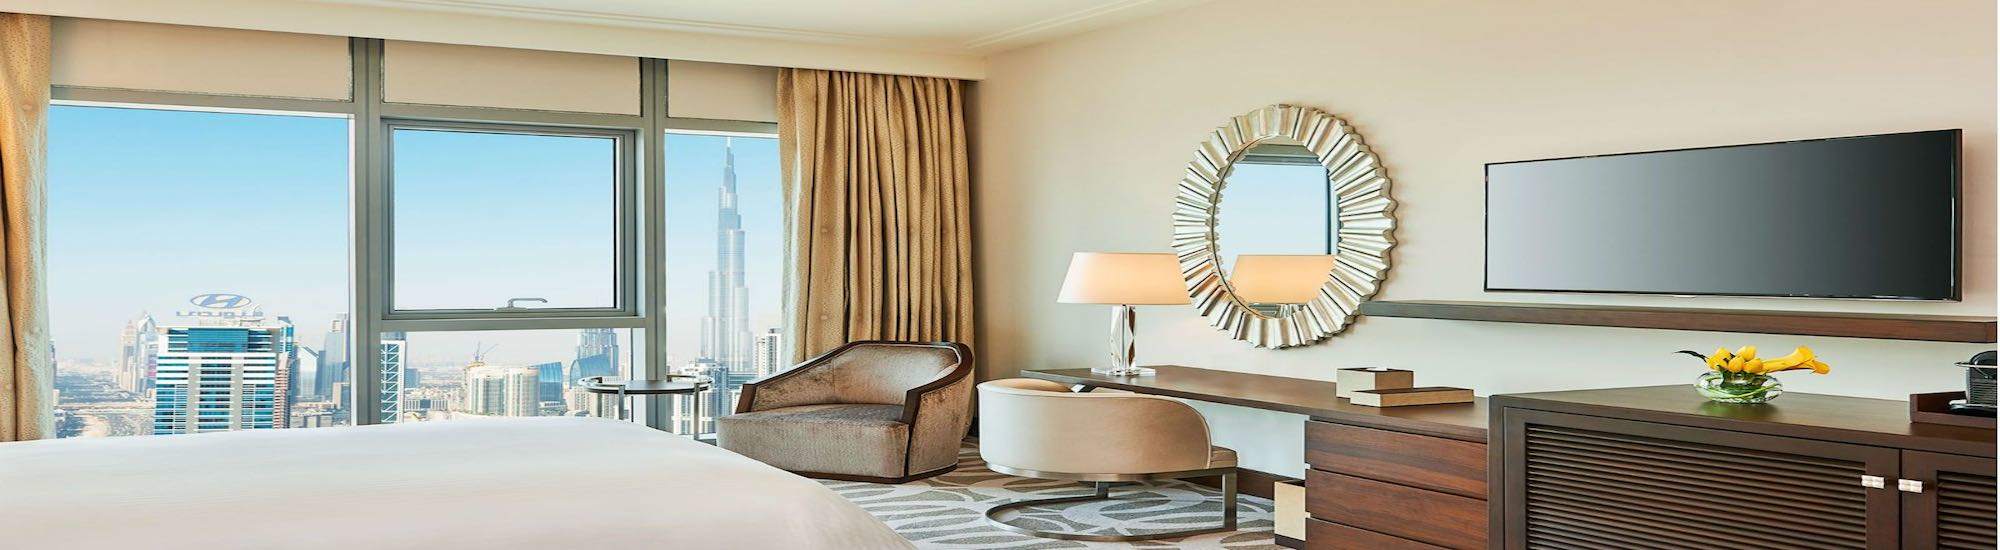 Dubai 5* accommodation, several excursions and flights